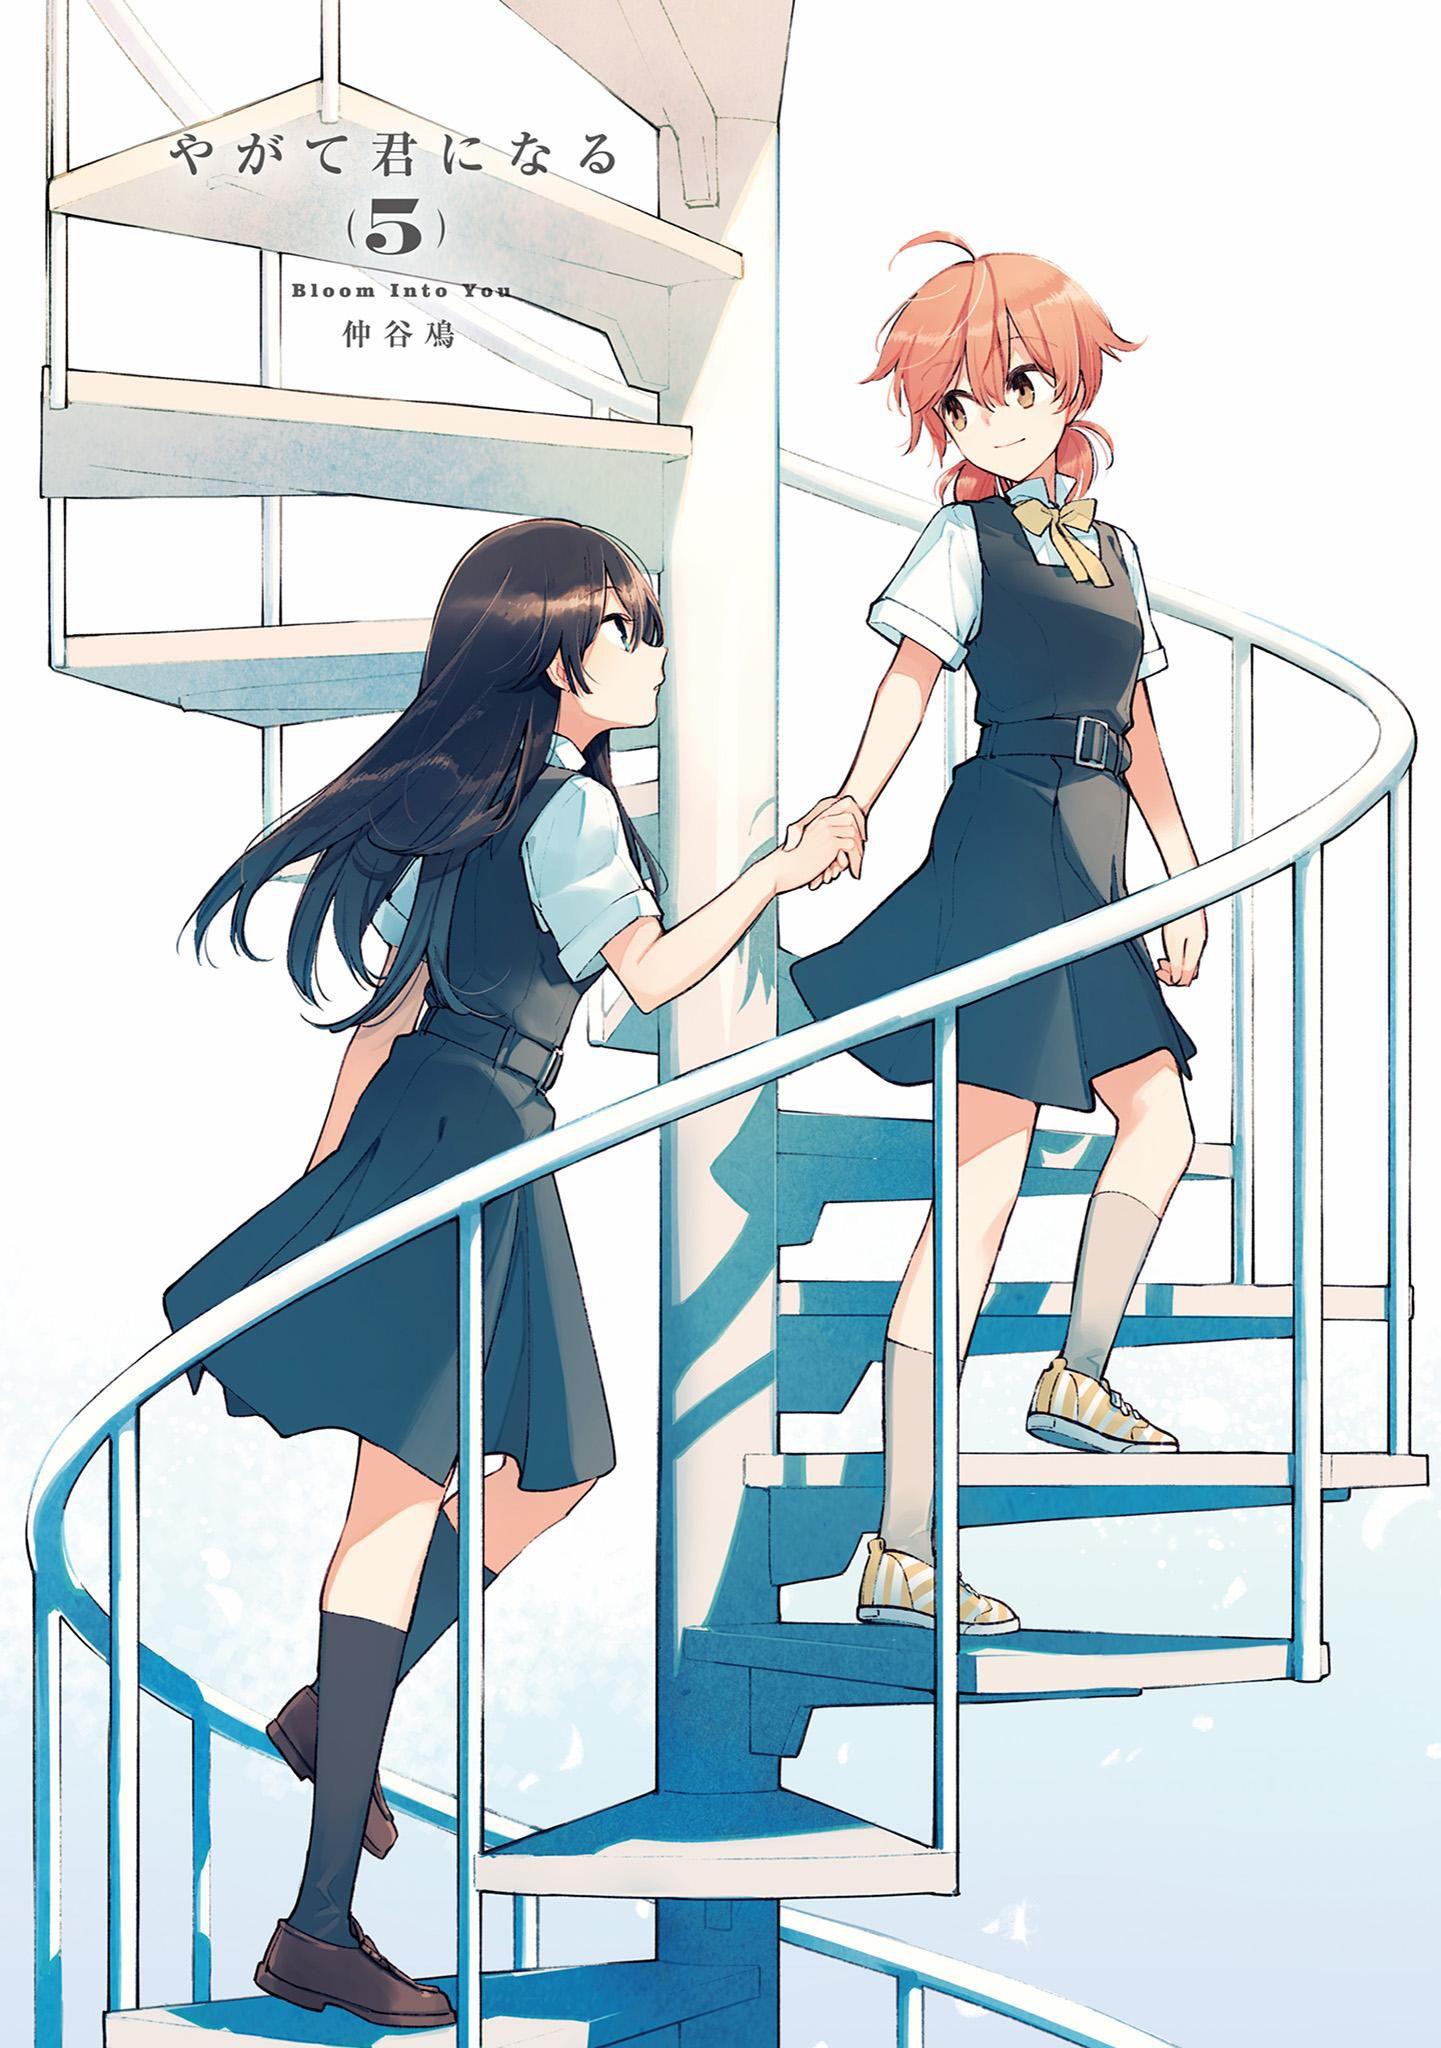 Bloom Into You Wallpapers Wallpaper Cave